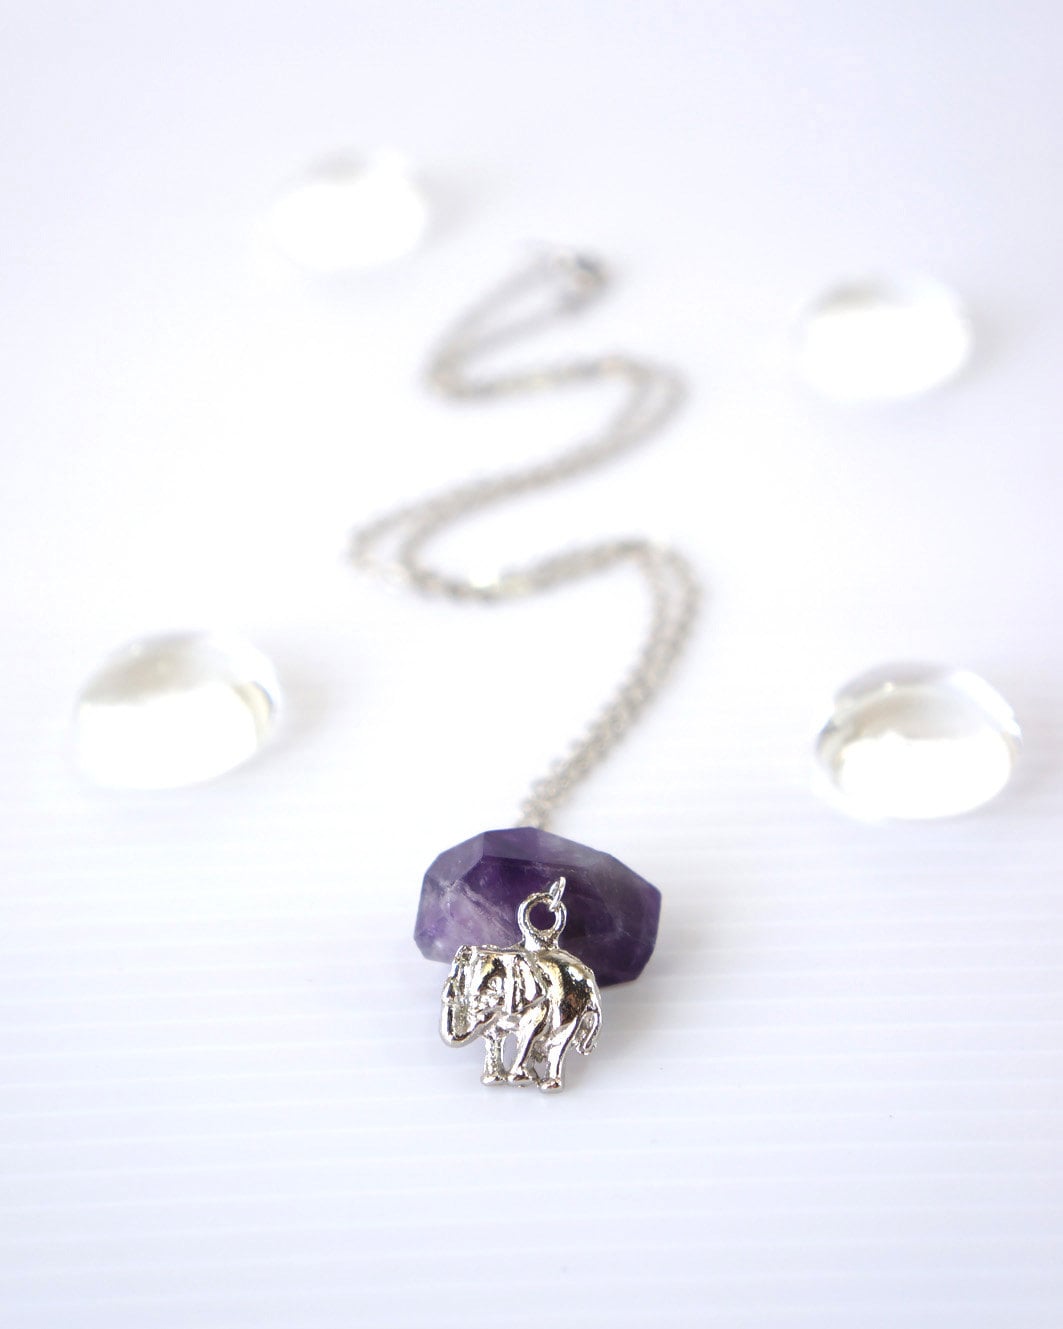 Little Elephant Charm Necklace, Purple Amethyst Faceted Stone, Cute Gift For Little Girl, Girls Jewelry